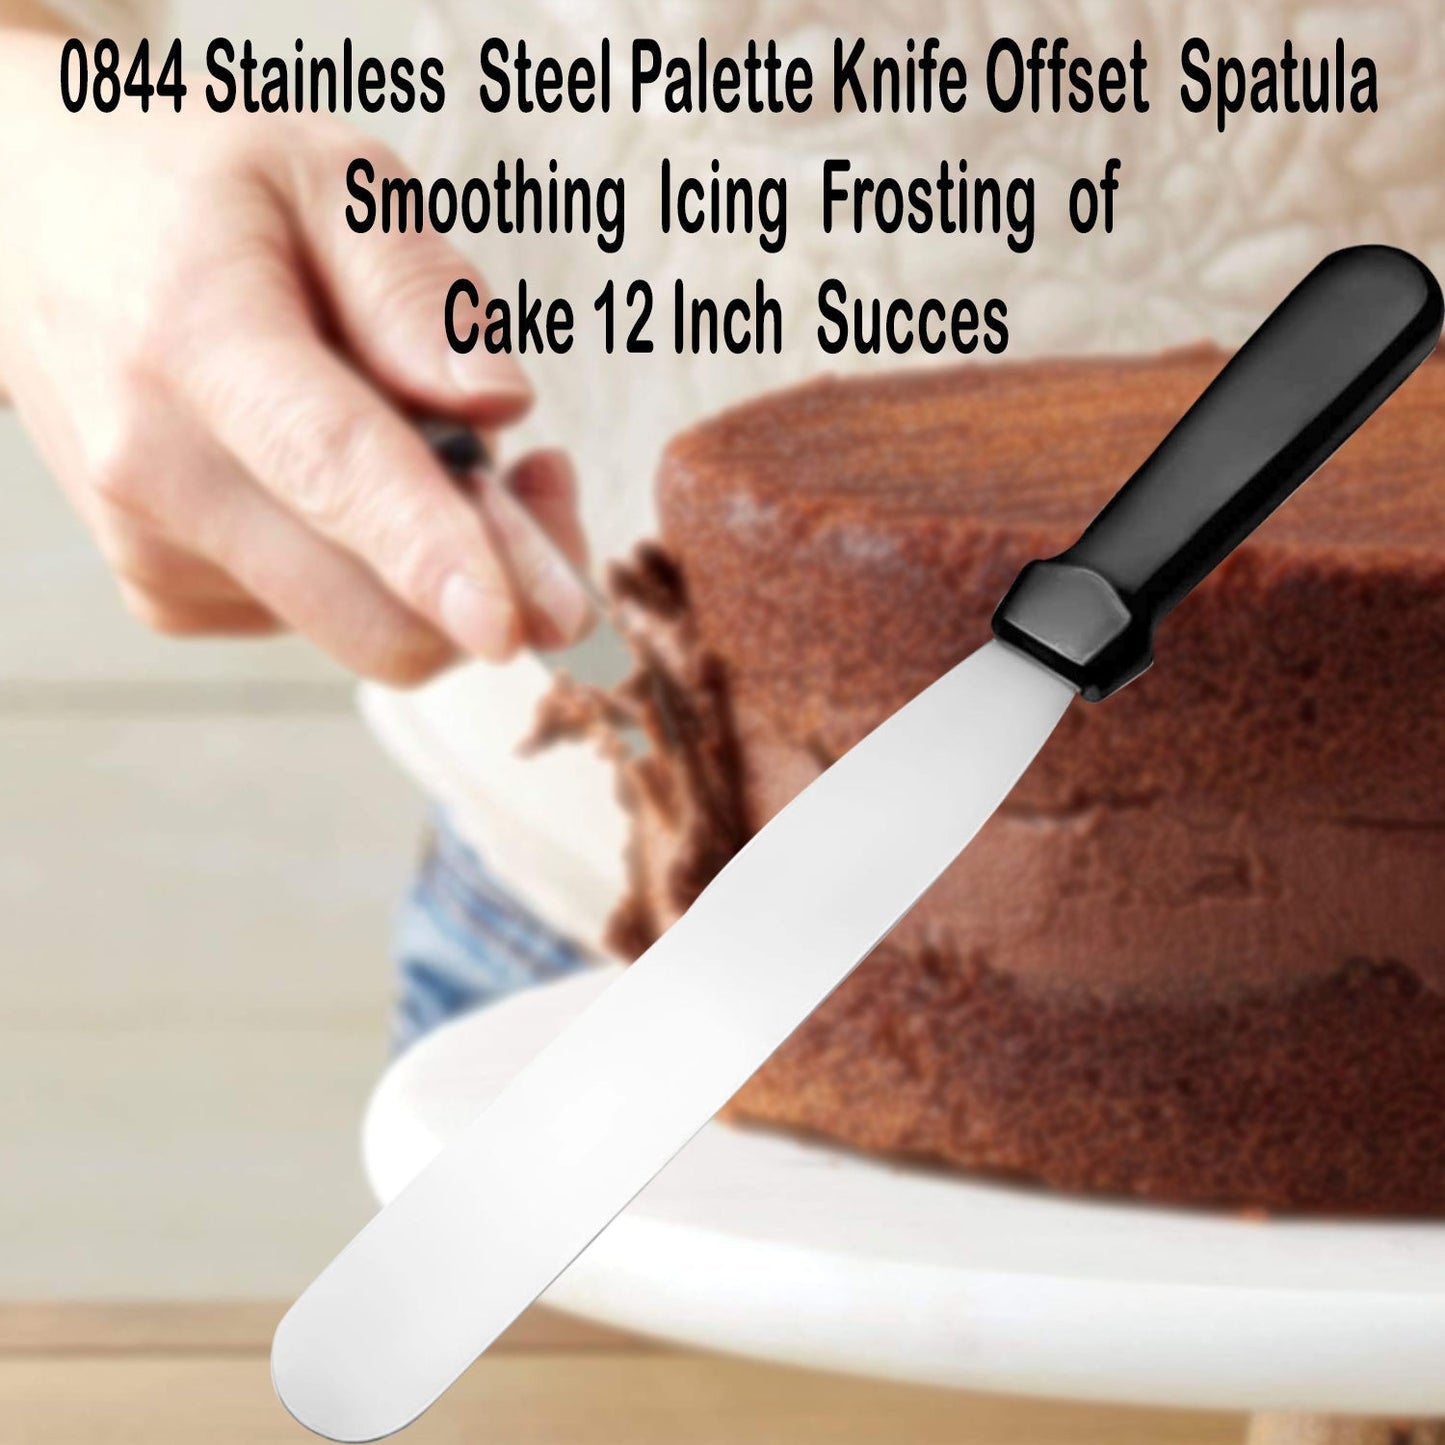 0844 Stainless Steel Palette Knife Offset Spatula for Spreading and Smoothing Icing Frosting of Cake 12 Inch Dukandaily